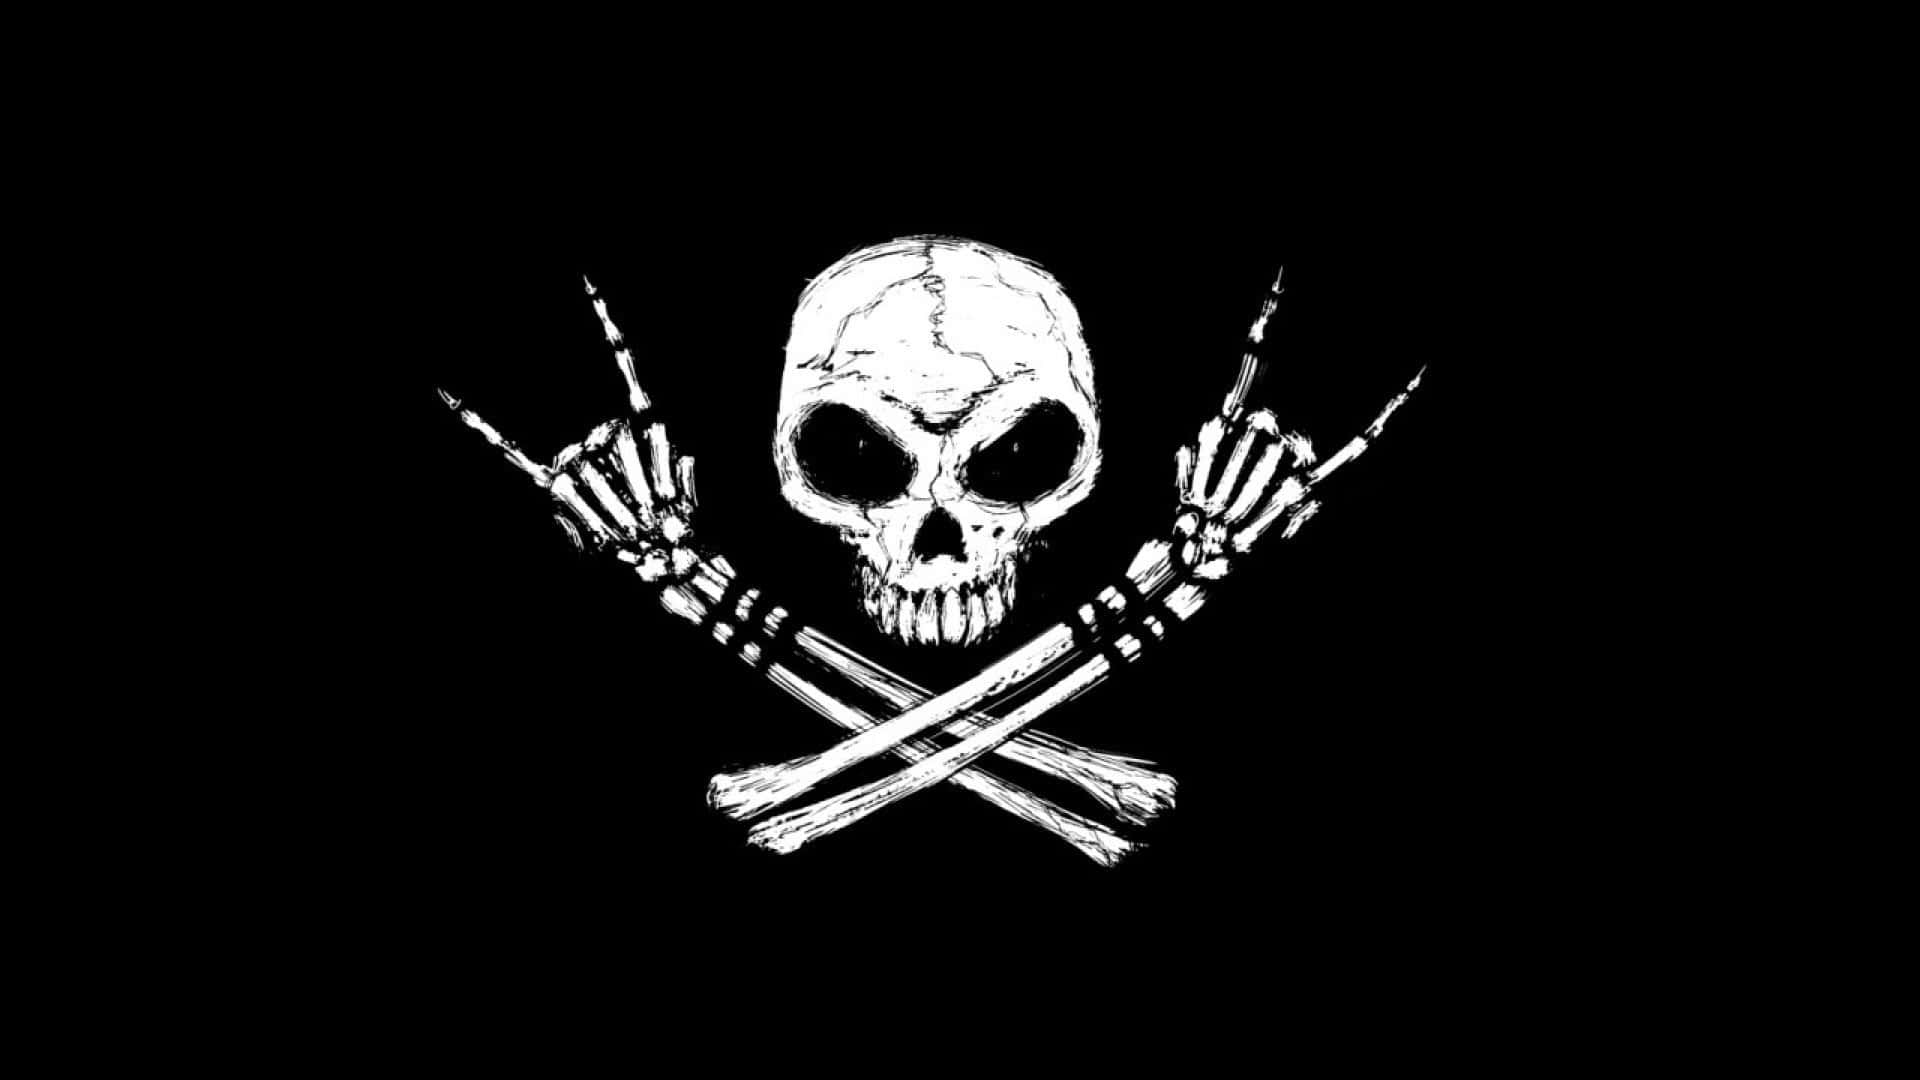 A Skull With Two Crossed Fingers On A Black Background Wallpaper